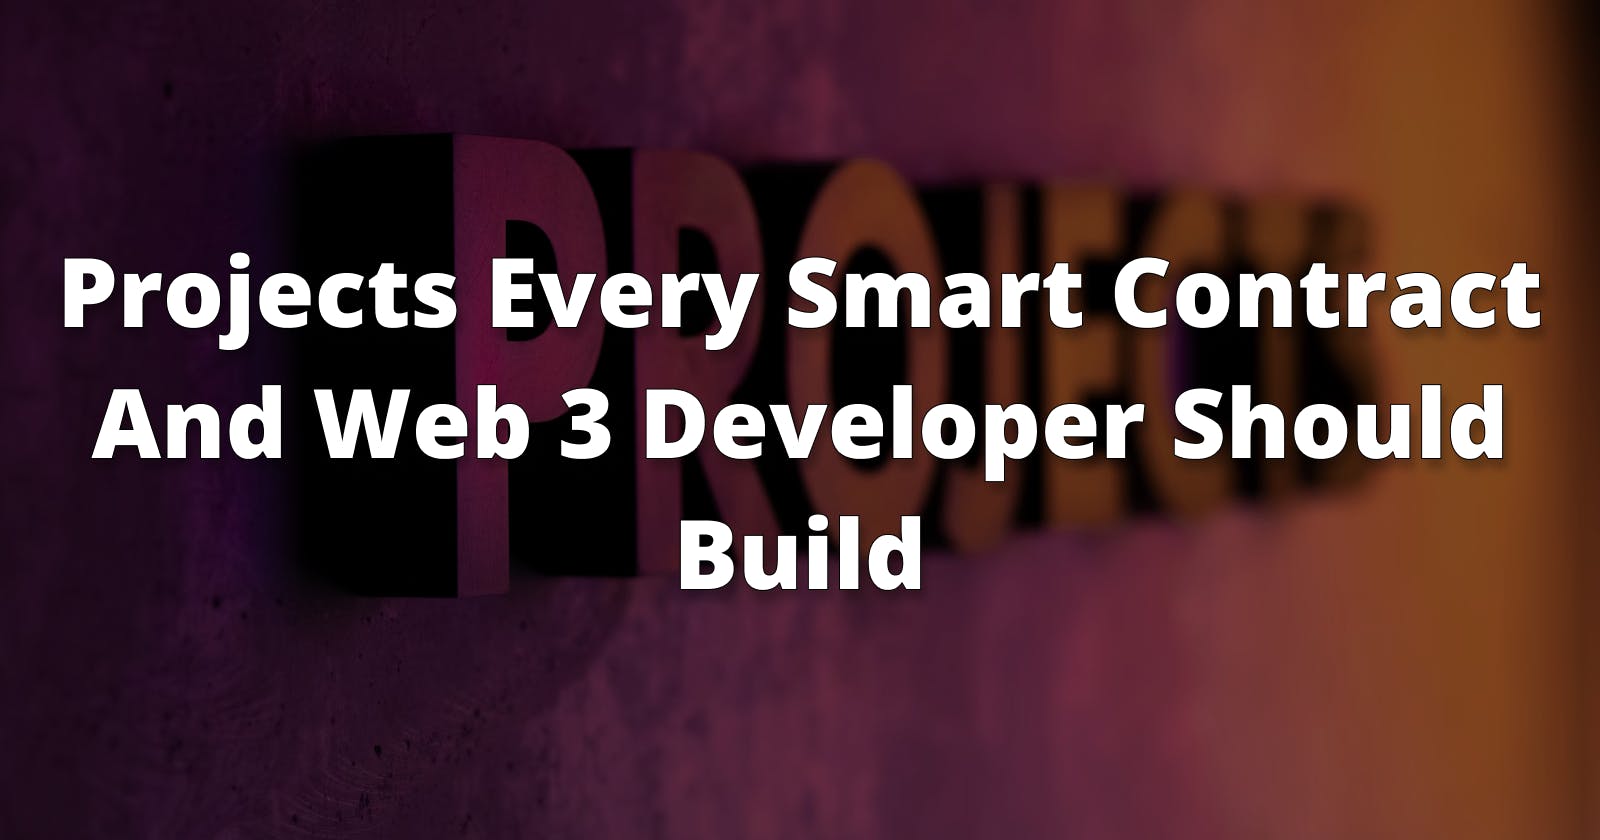 Projects Every Smart Contract And Web 3 Developer Should Build